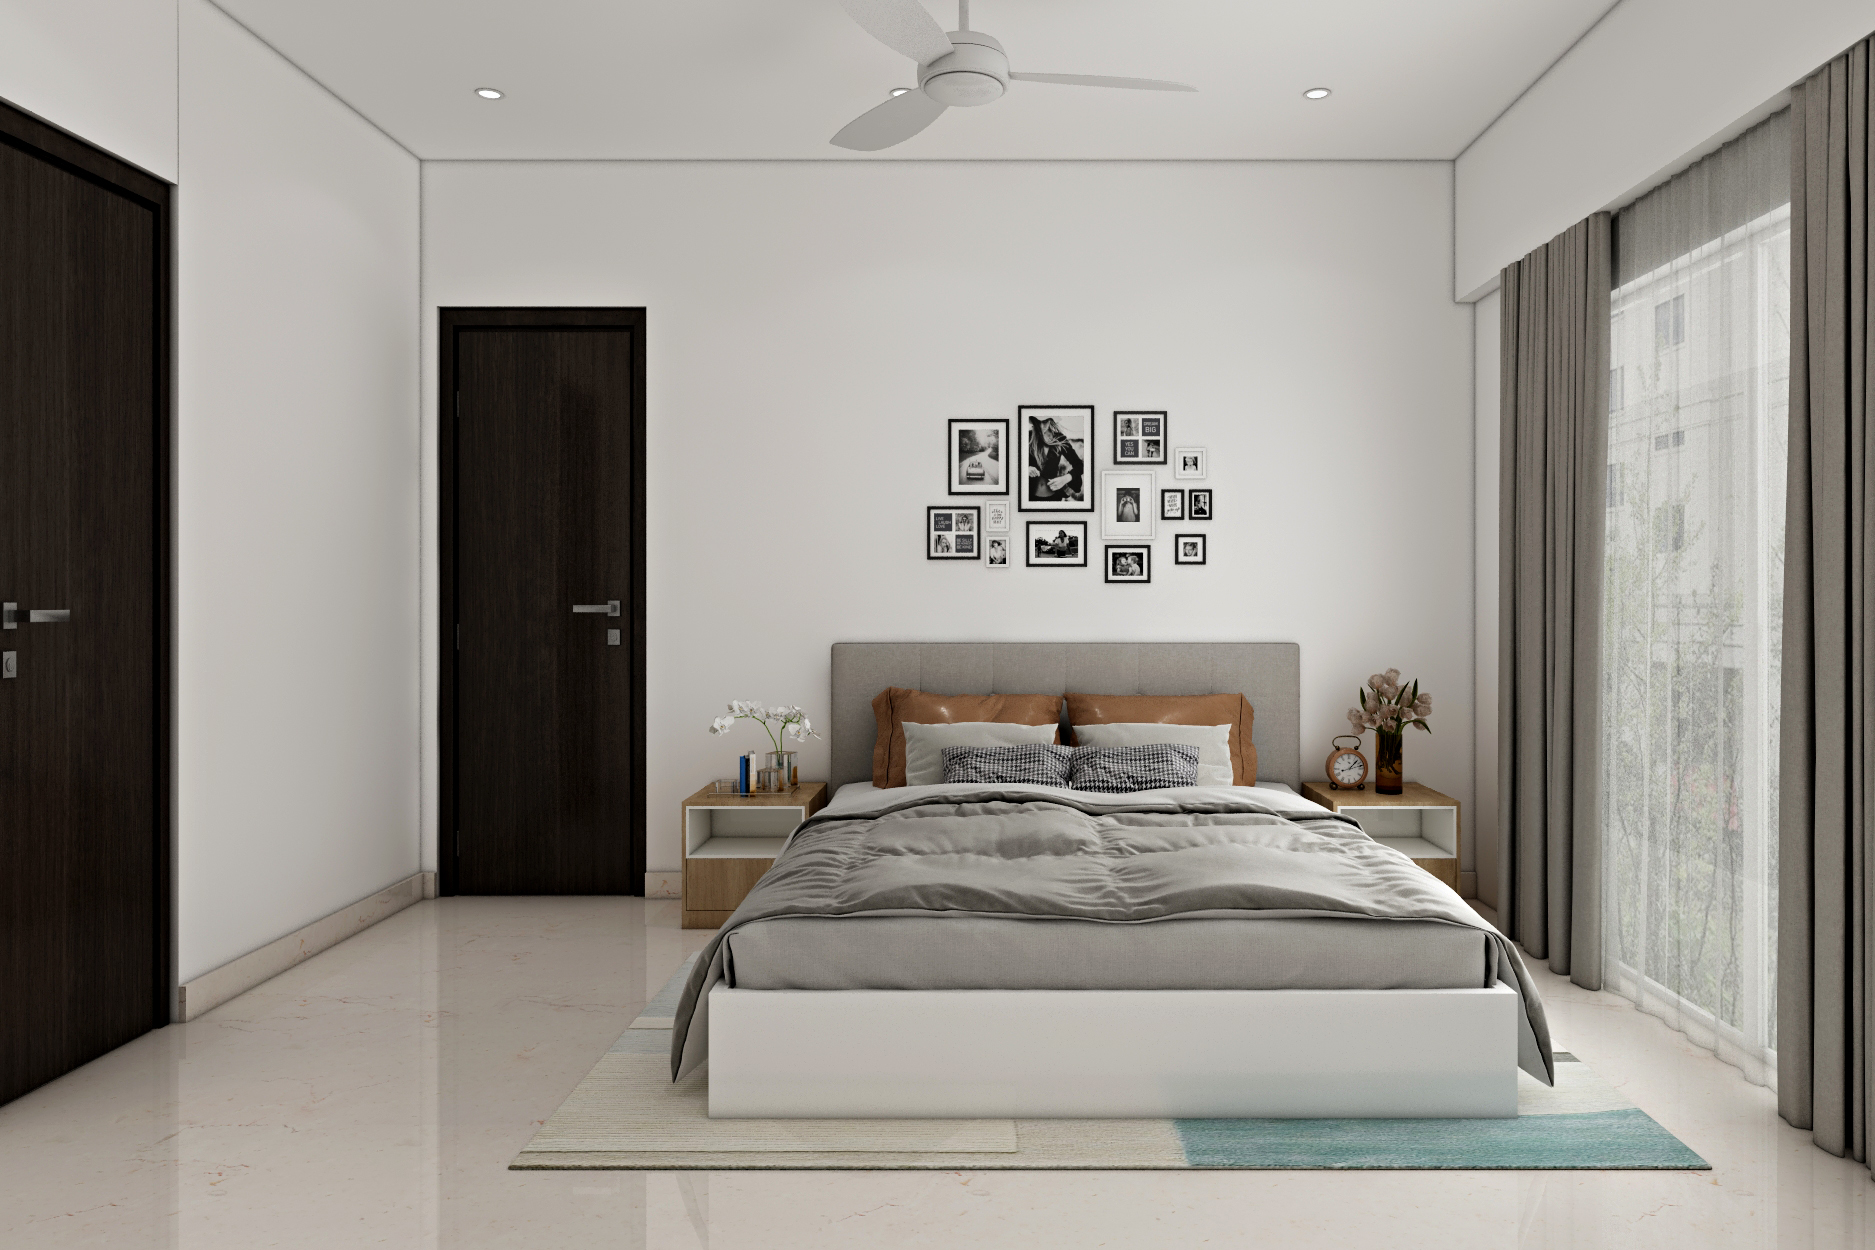 Spacious Guest Bedroom Design With Minimalistic Interiors